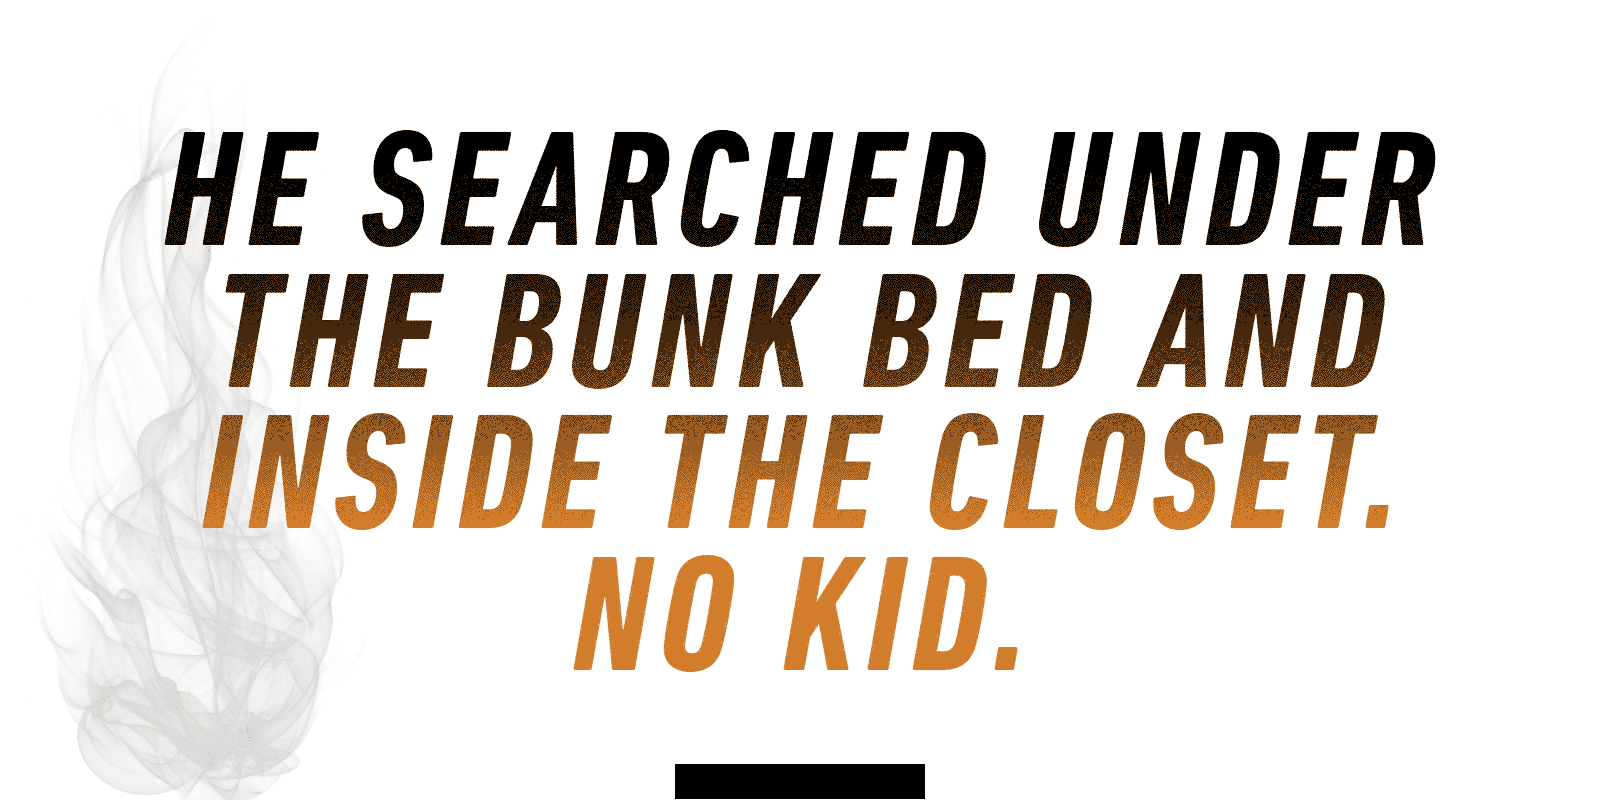 "He searched under the bunk bed and inside the closet. No kid."